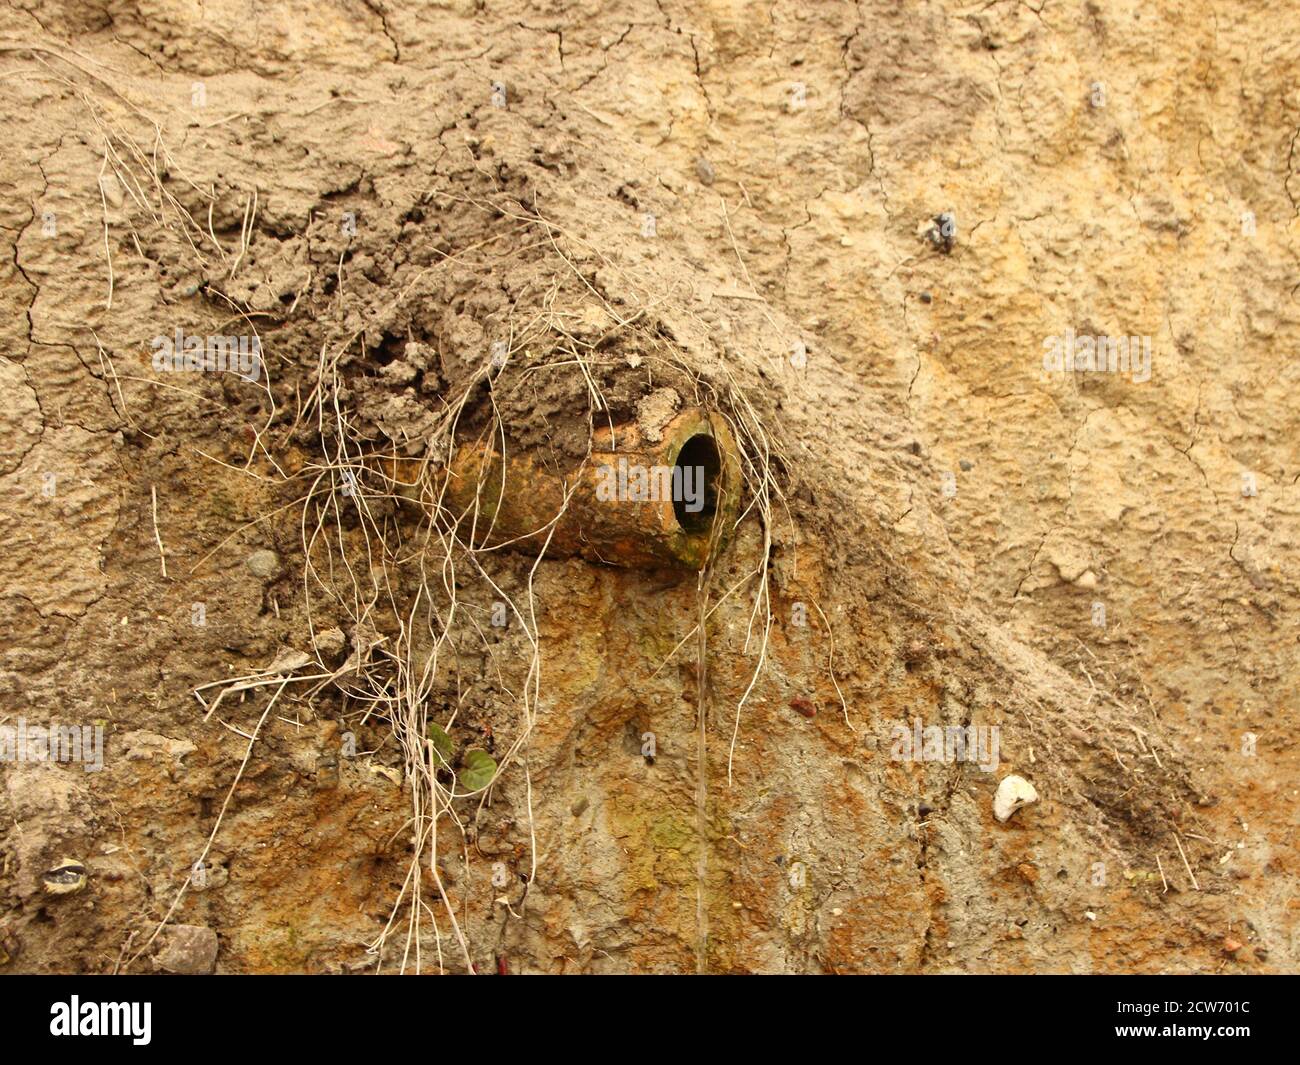 An isolated clay drain pipe. It's dirty, overgrown, and in a sand slope. Stock Photo